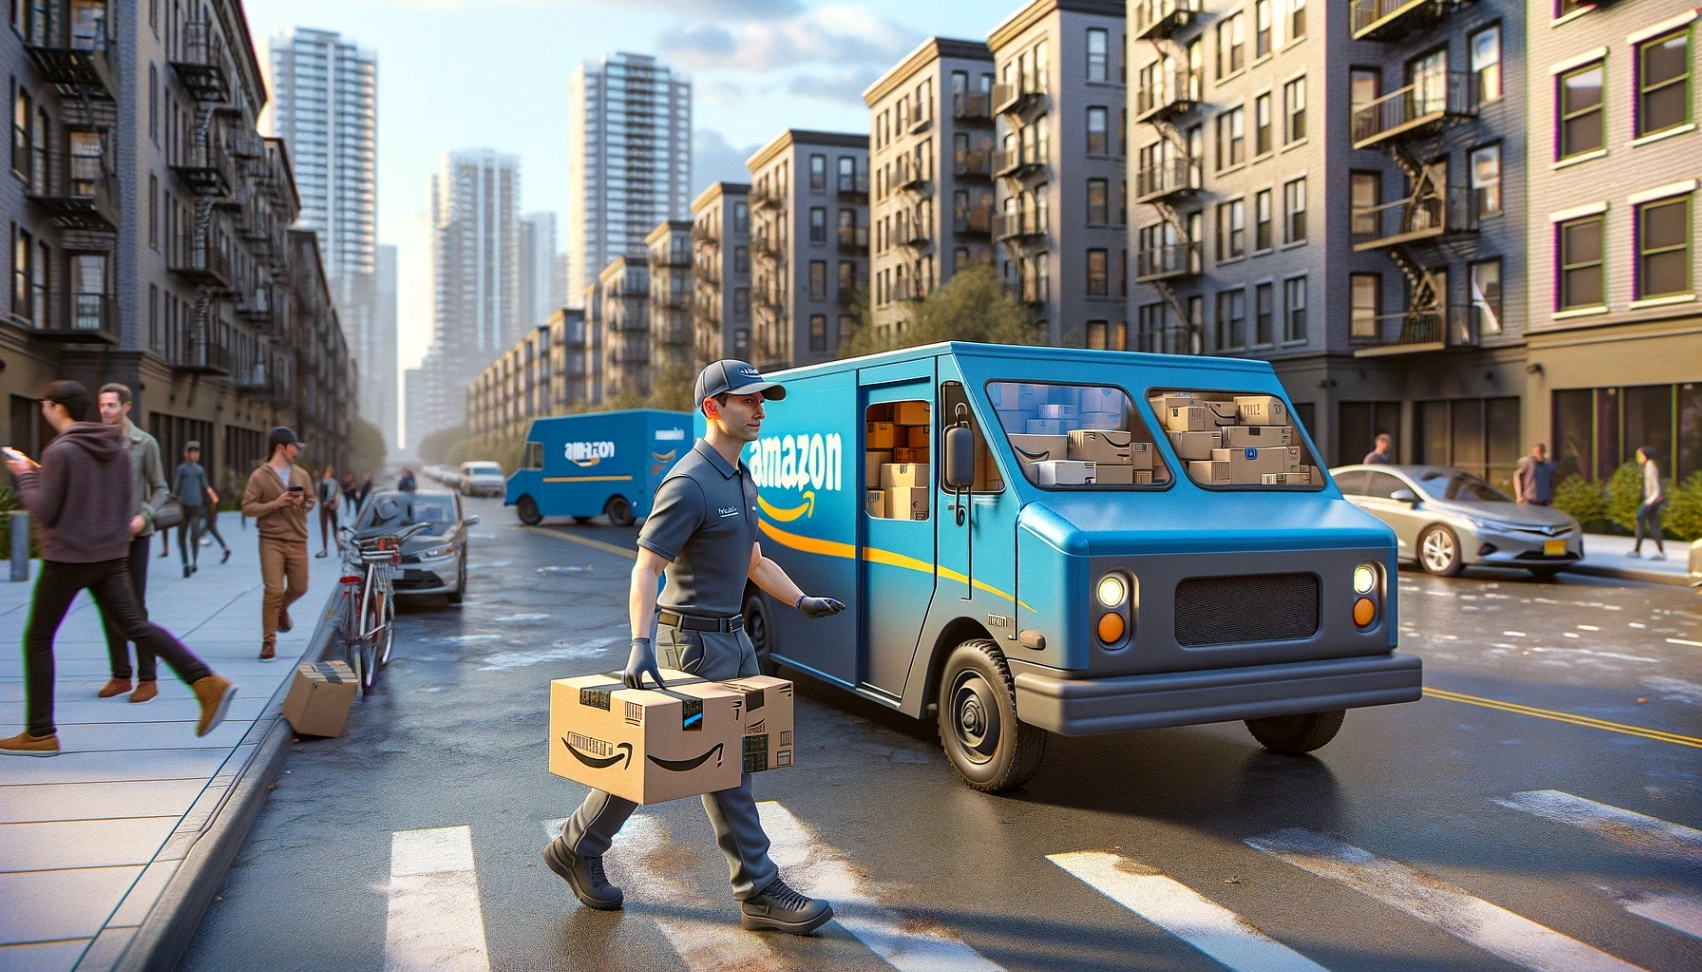 Amazon Delivery Drivers: How to Apply for This Position